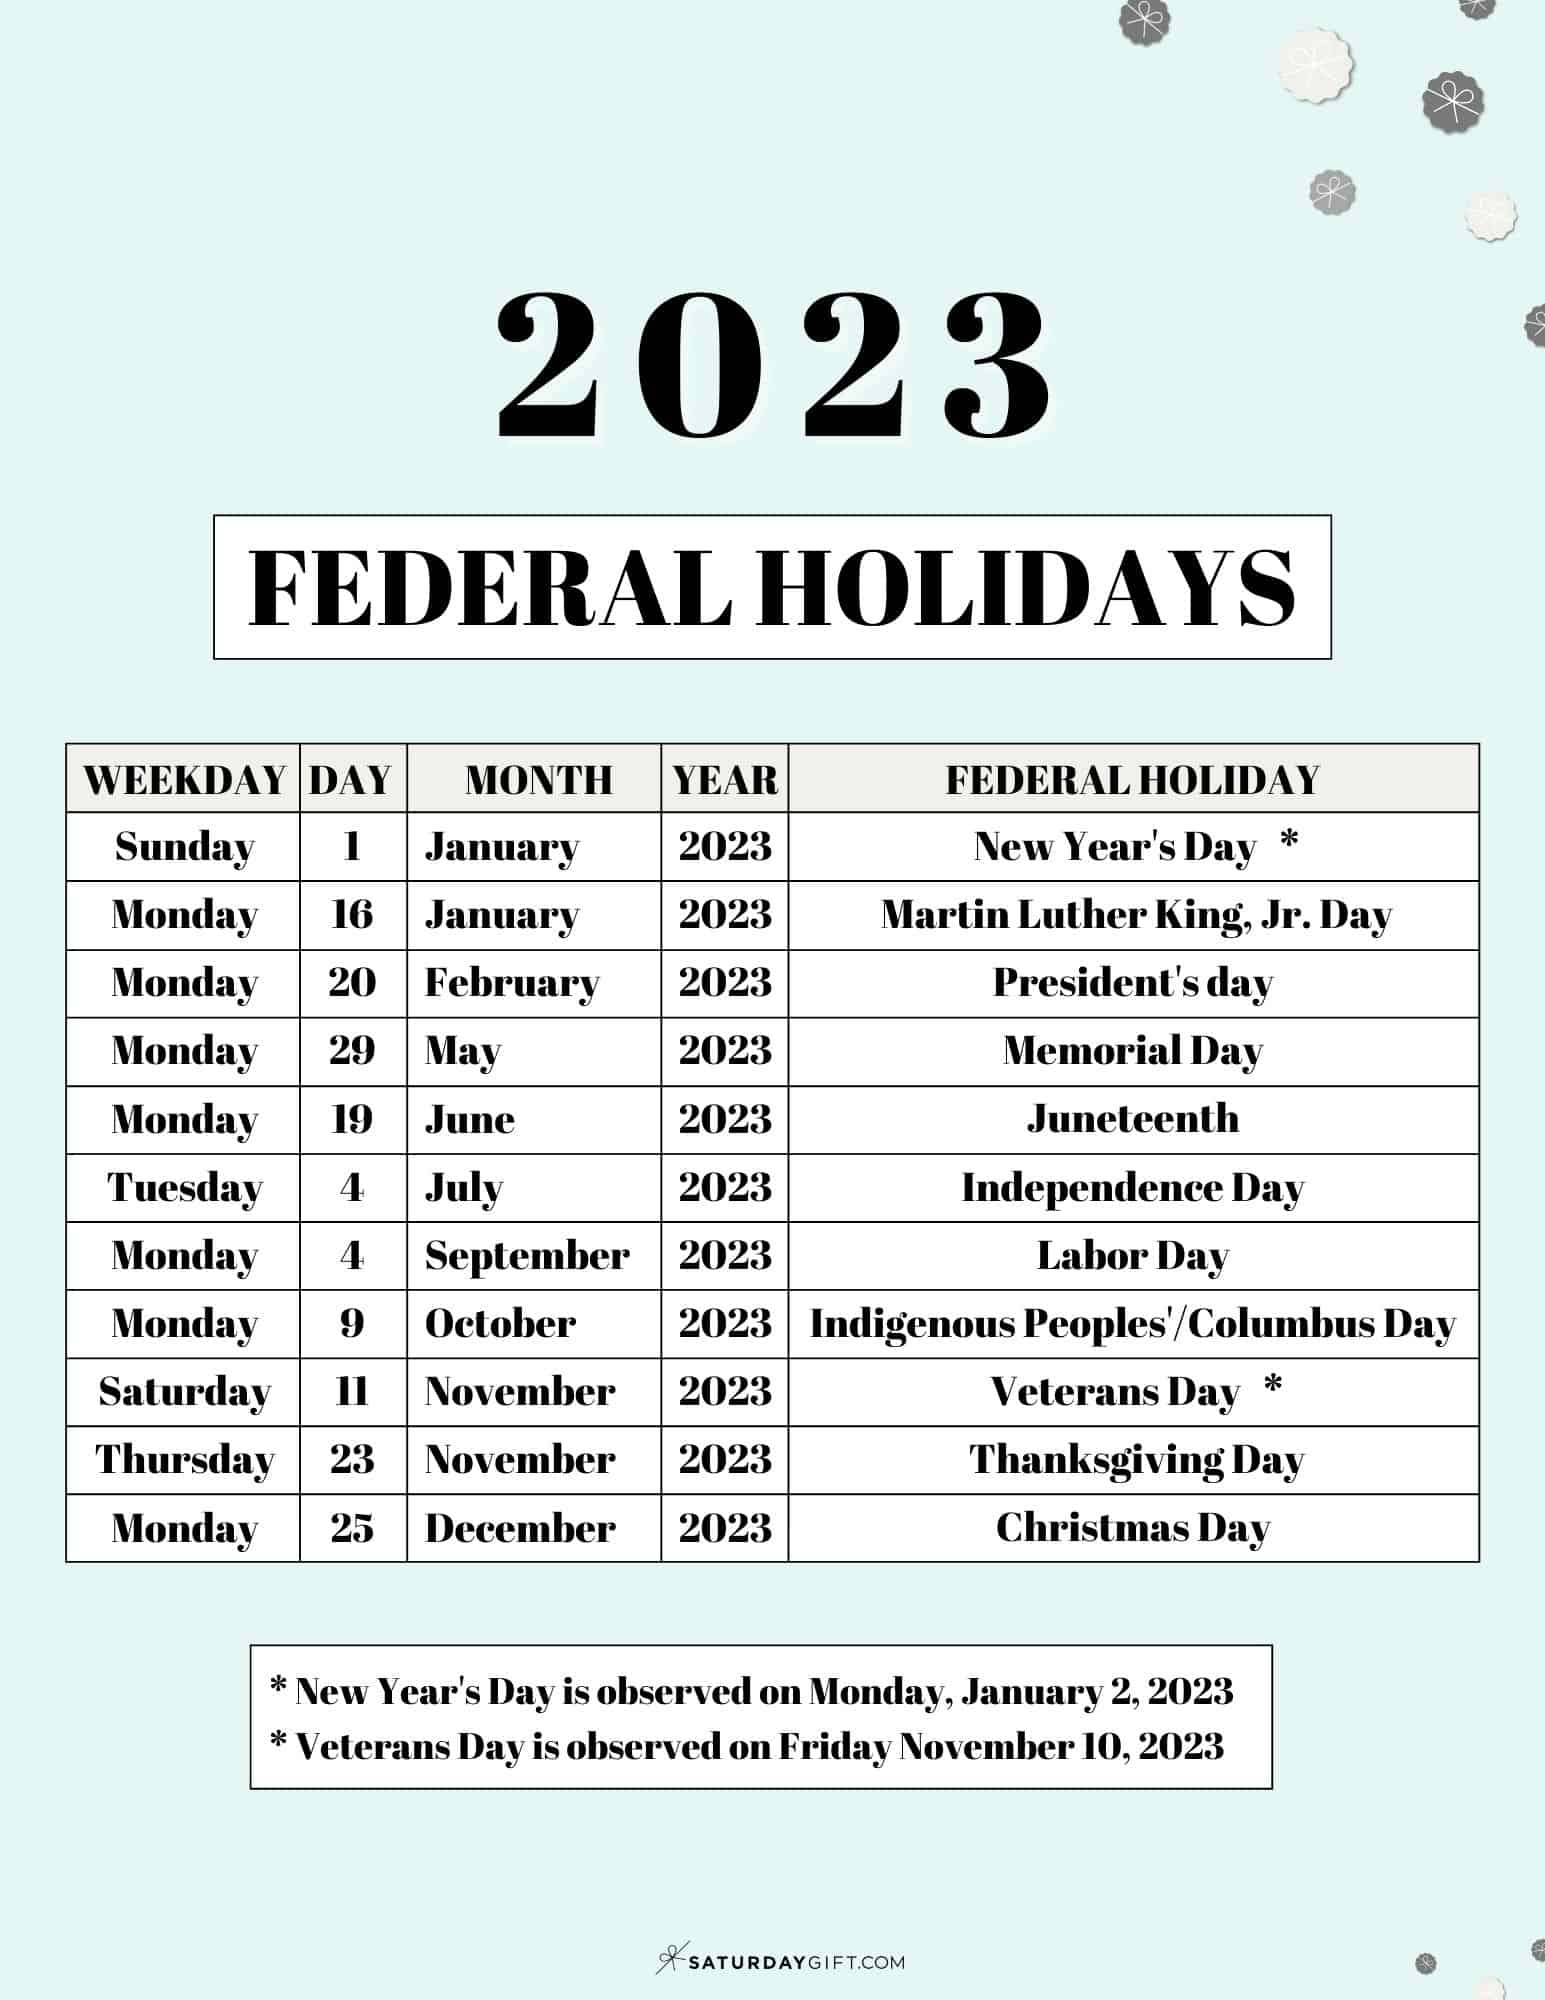 List Of Federal Holidays 2023 In The U S SaturdayGift - Free Printable 2024 Federal Holiday Calendar